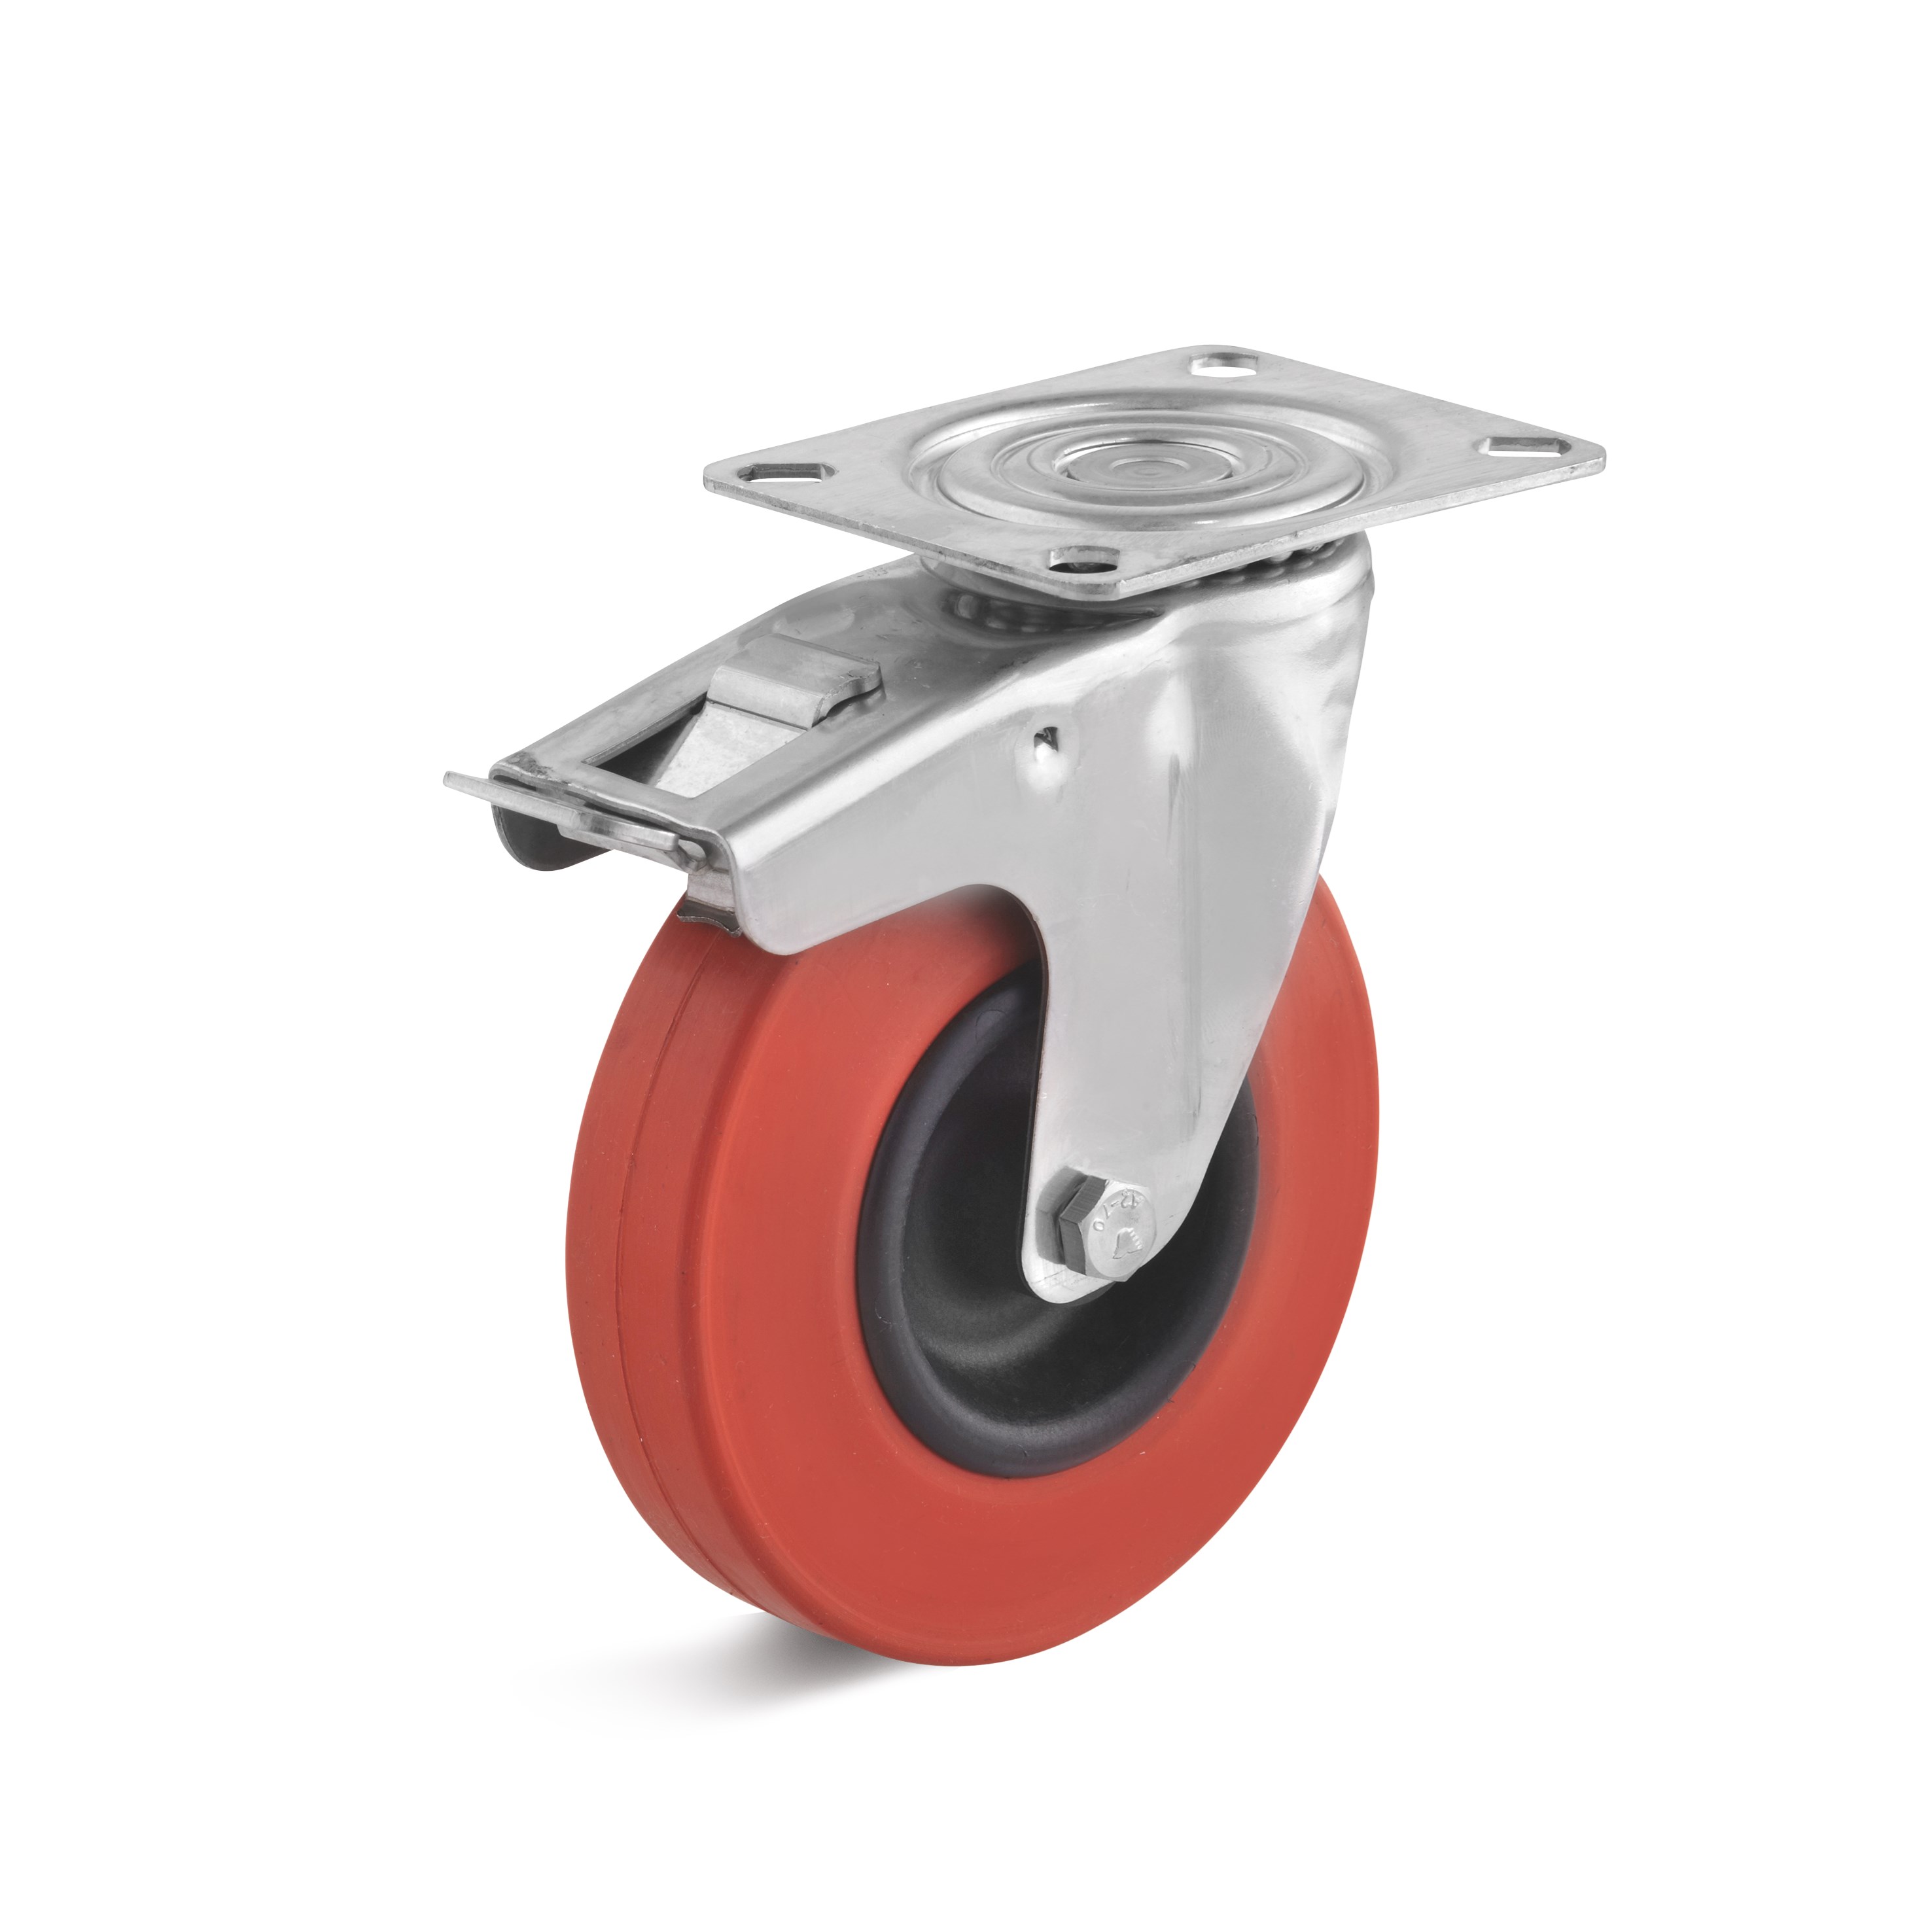 Stainless steel swivel castor with double stop and heat resistant rubber wheel L-IV-HGK-125-G-3-DSN-ROT